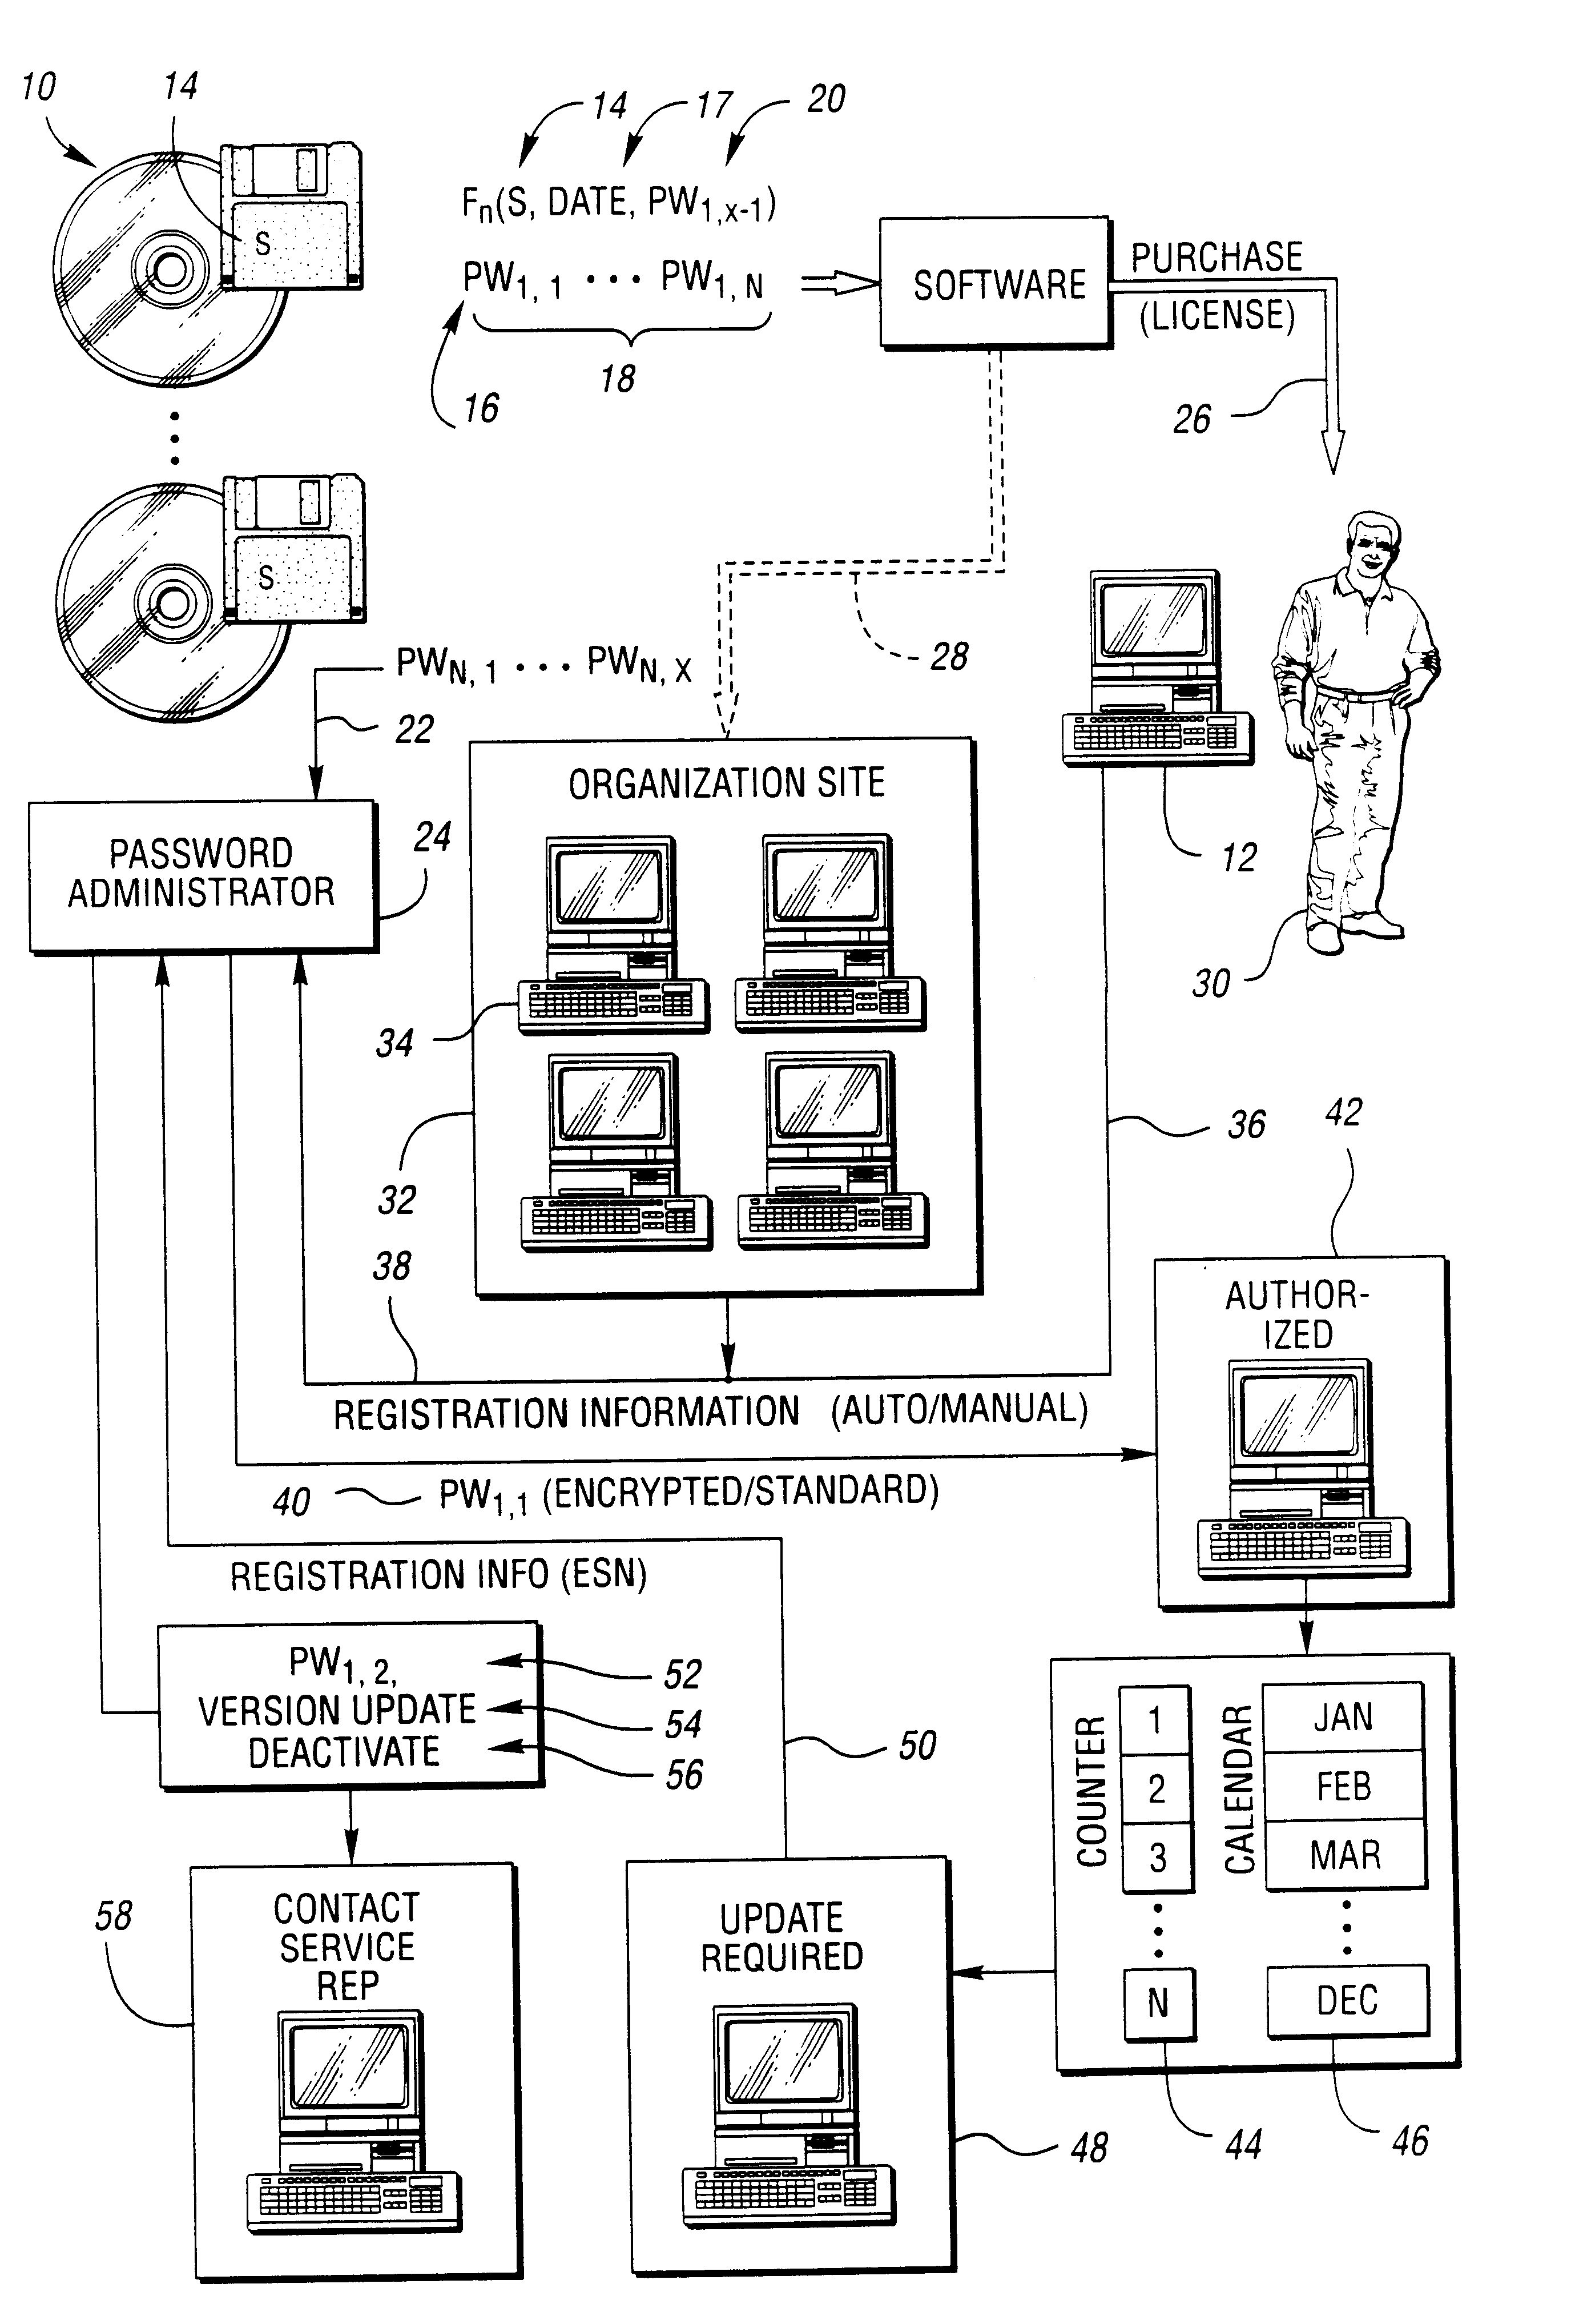 Method for securing software to increase license compliance